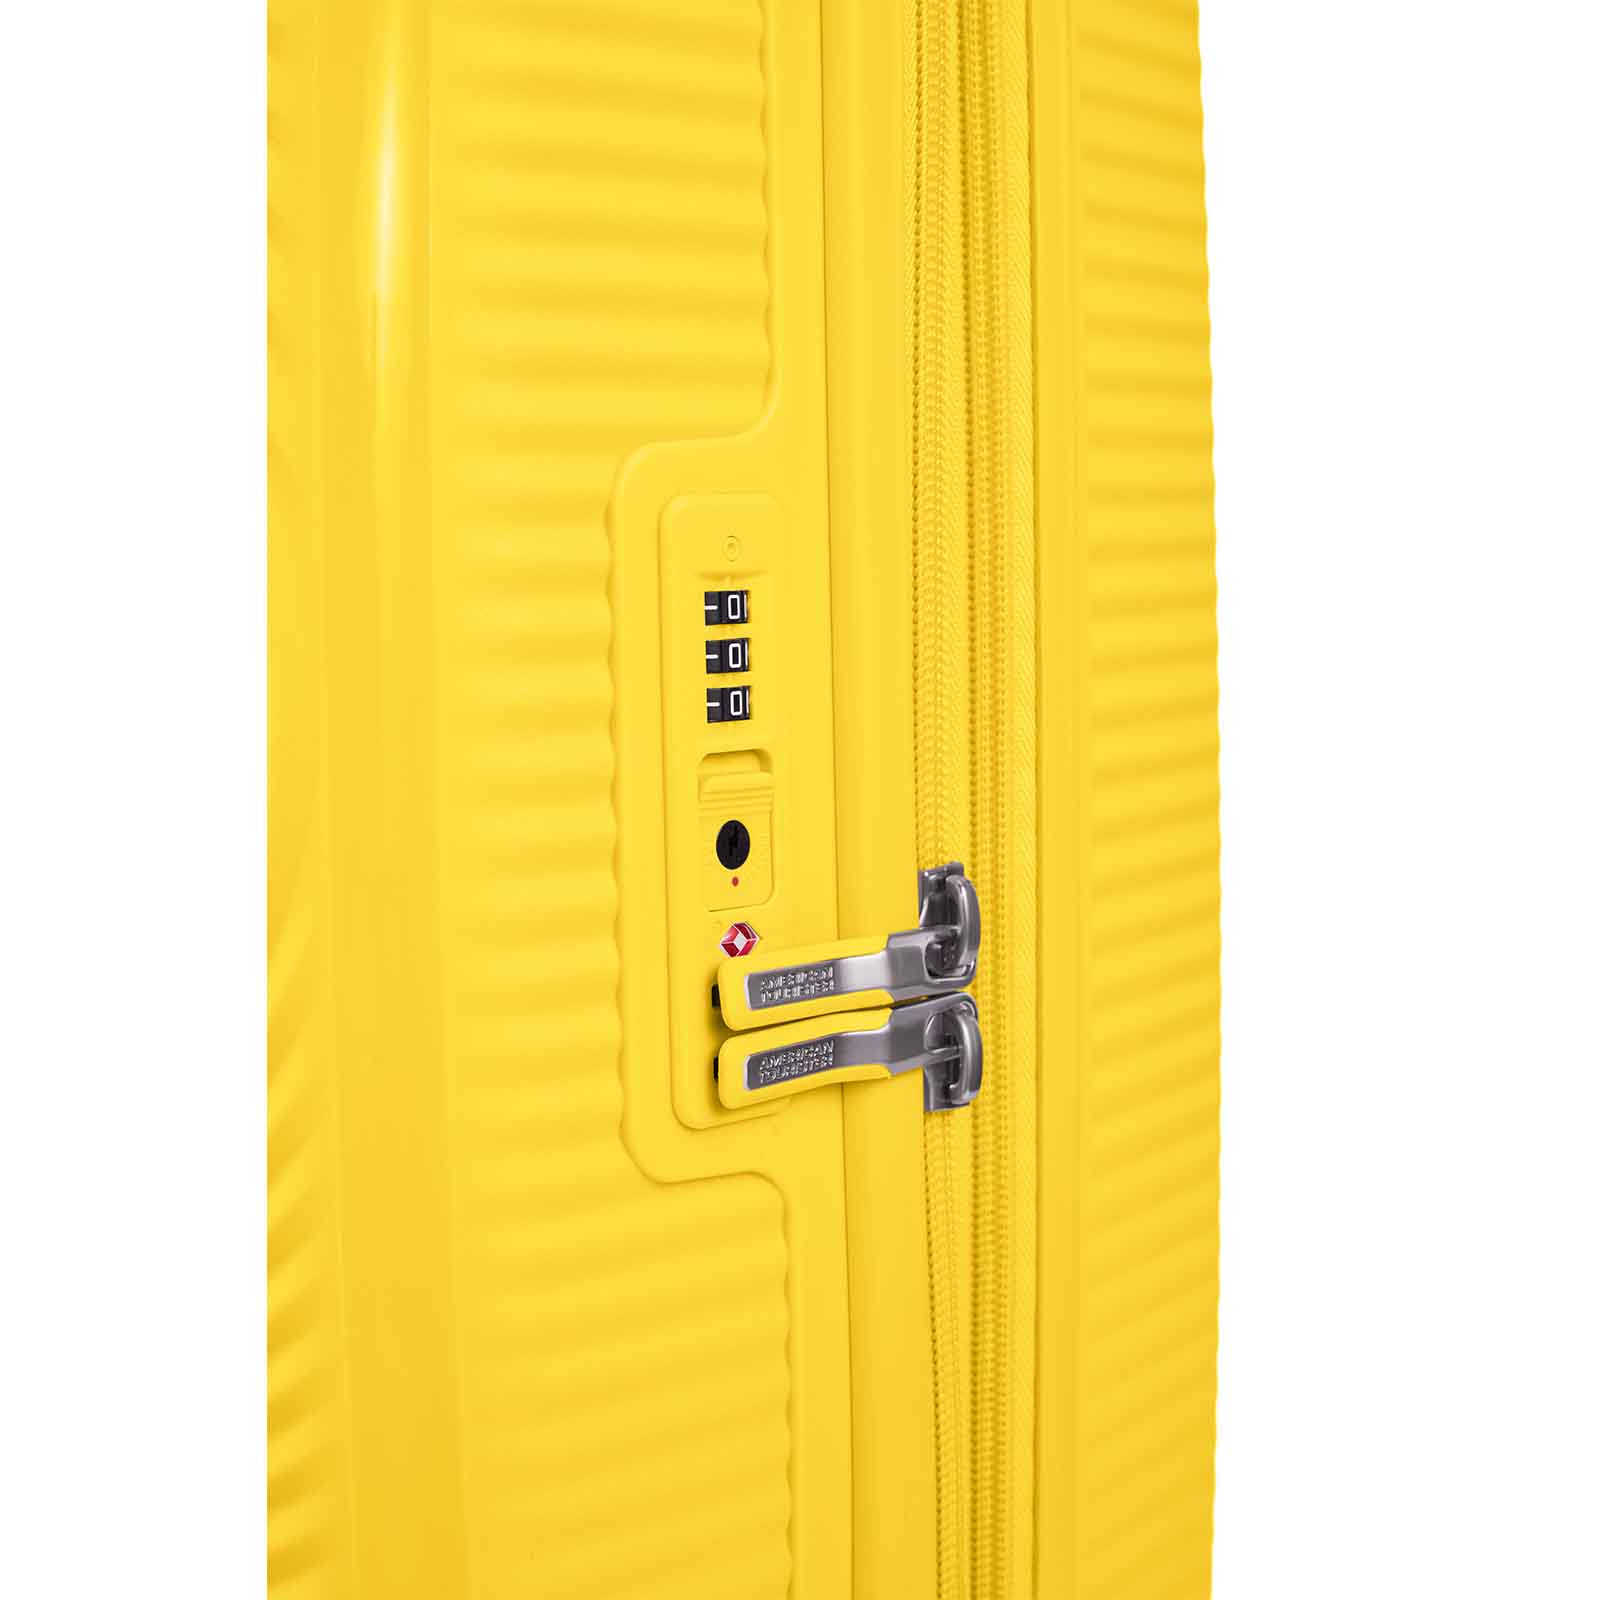 American-Tourister-Curio-2-55cm-Carry-On-Suitcase-Golden-Yellow-Lock